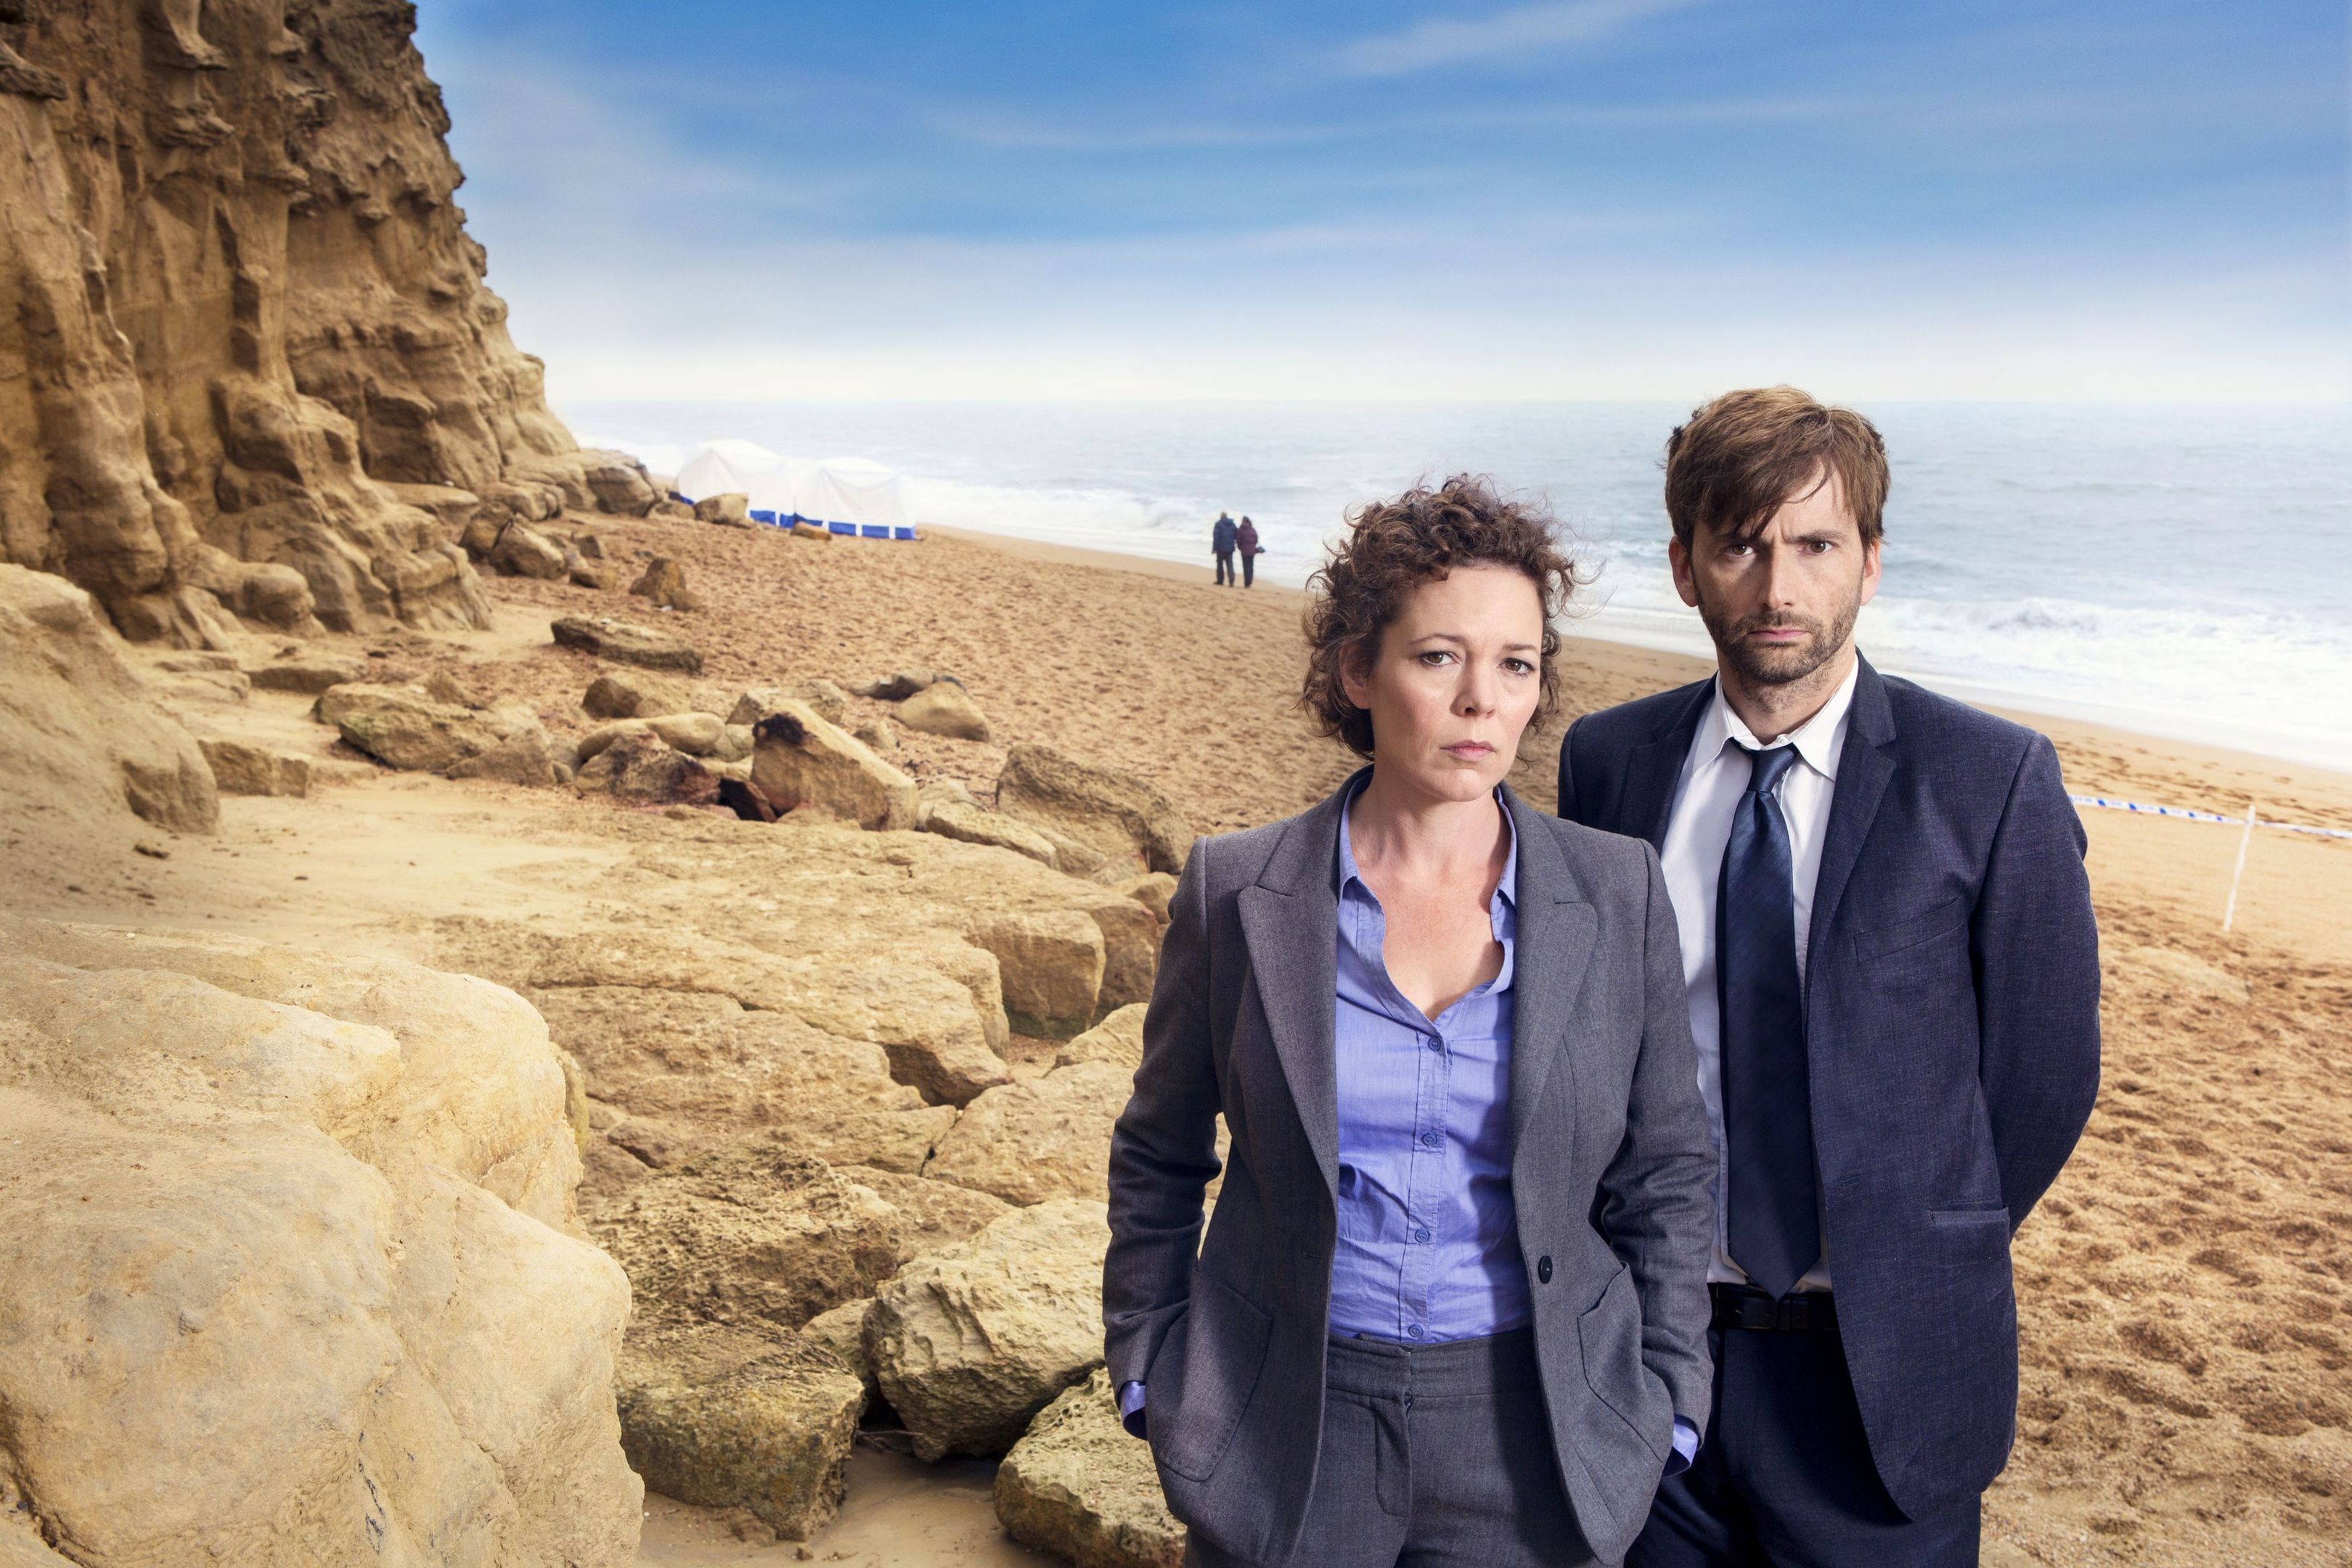 David Tennant and Olivia Colman in their roles as Detective Inspector Alec Hardy and Detective Sergeant Ellie Miller in Broadchurch.